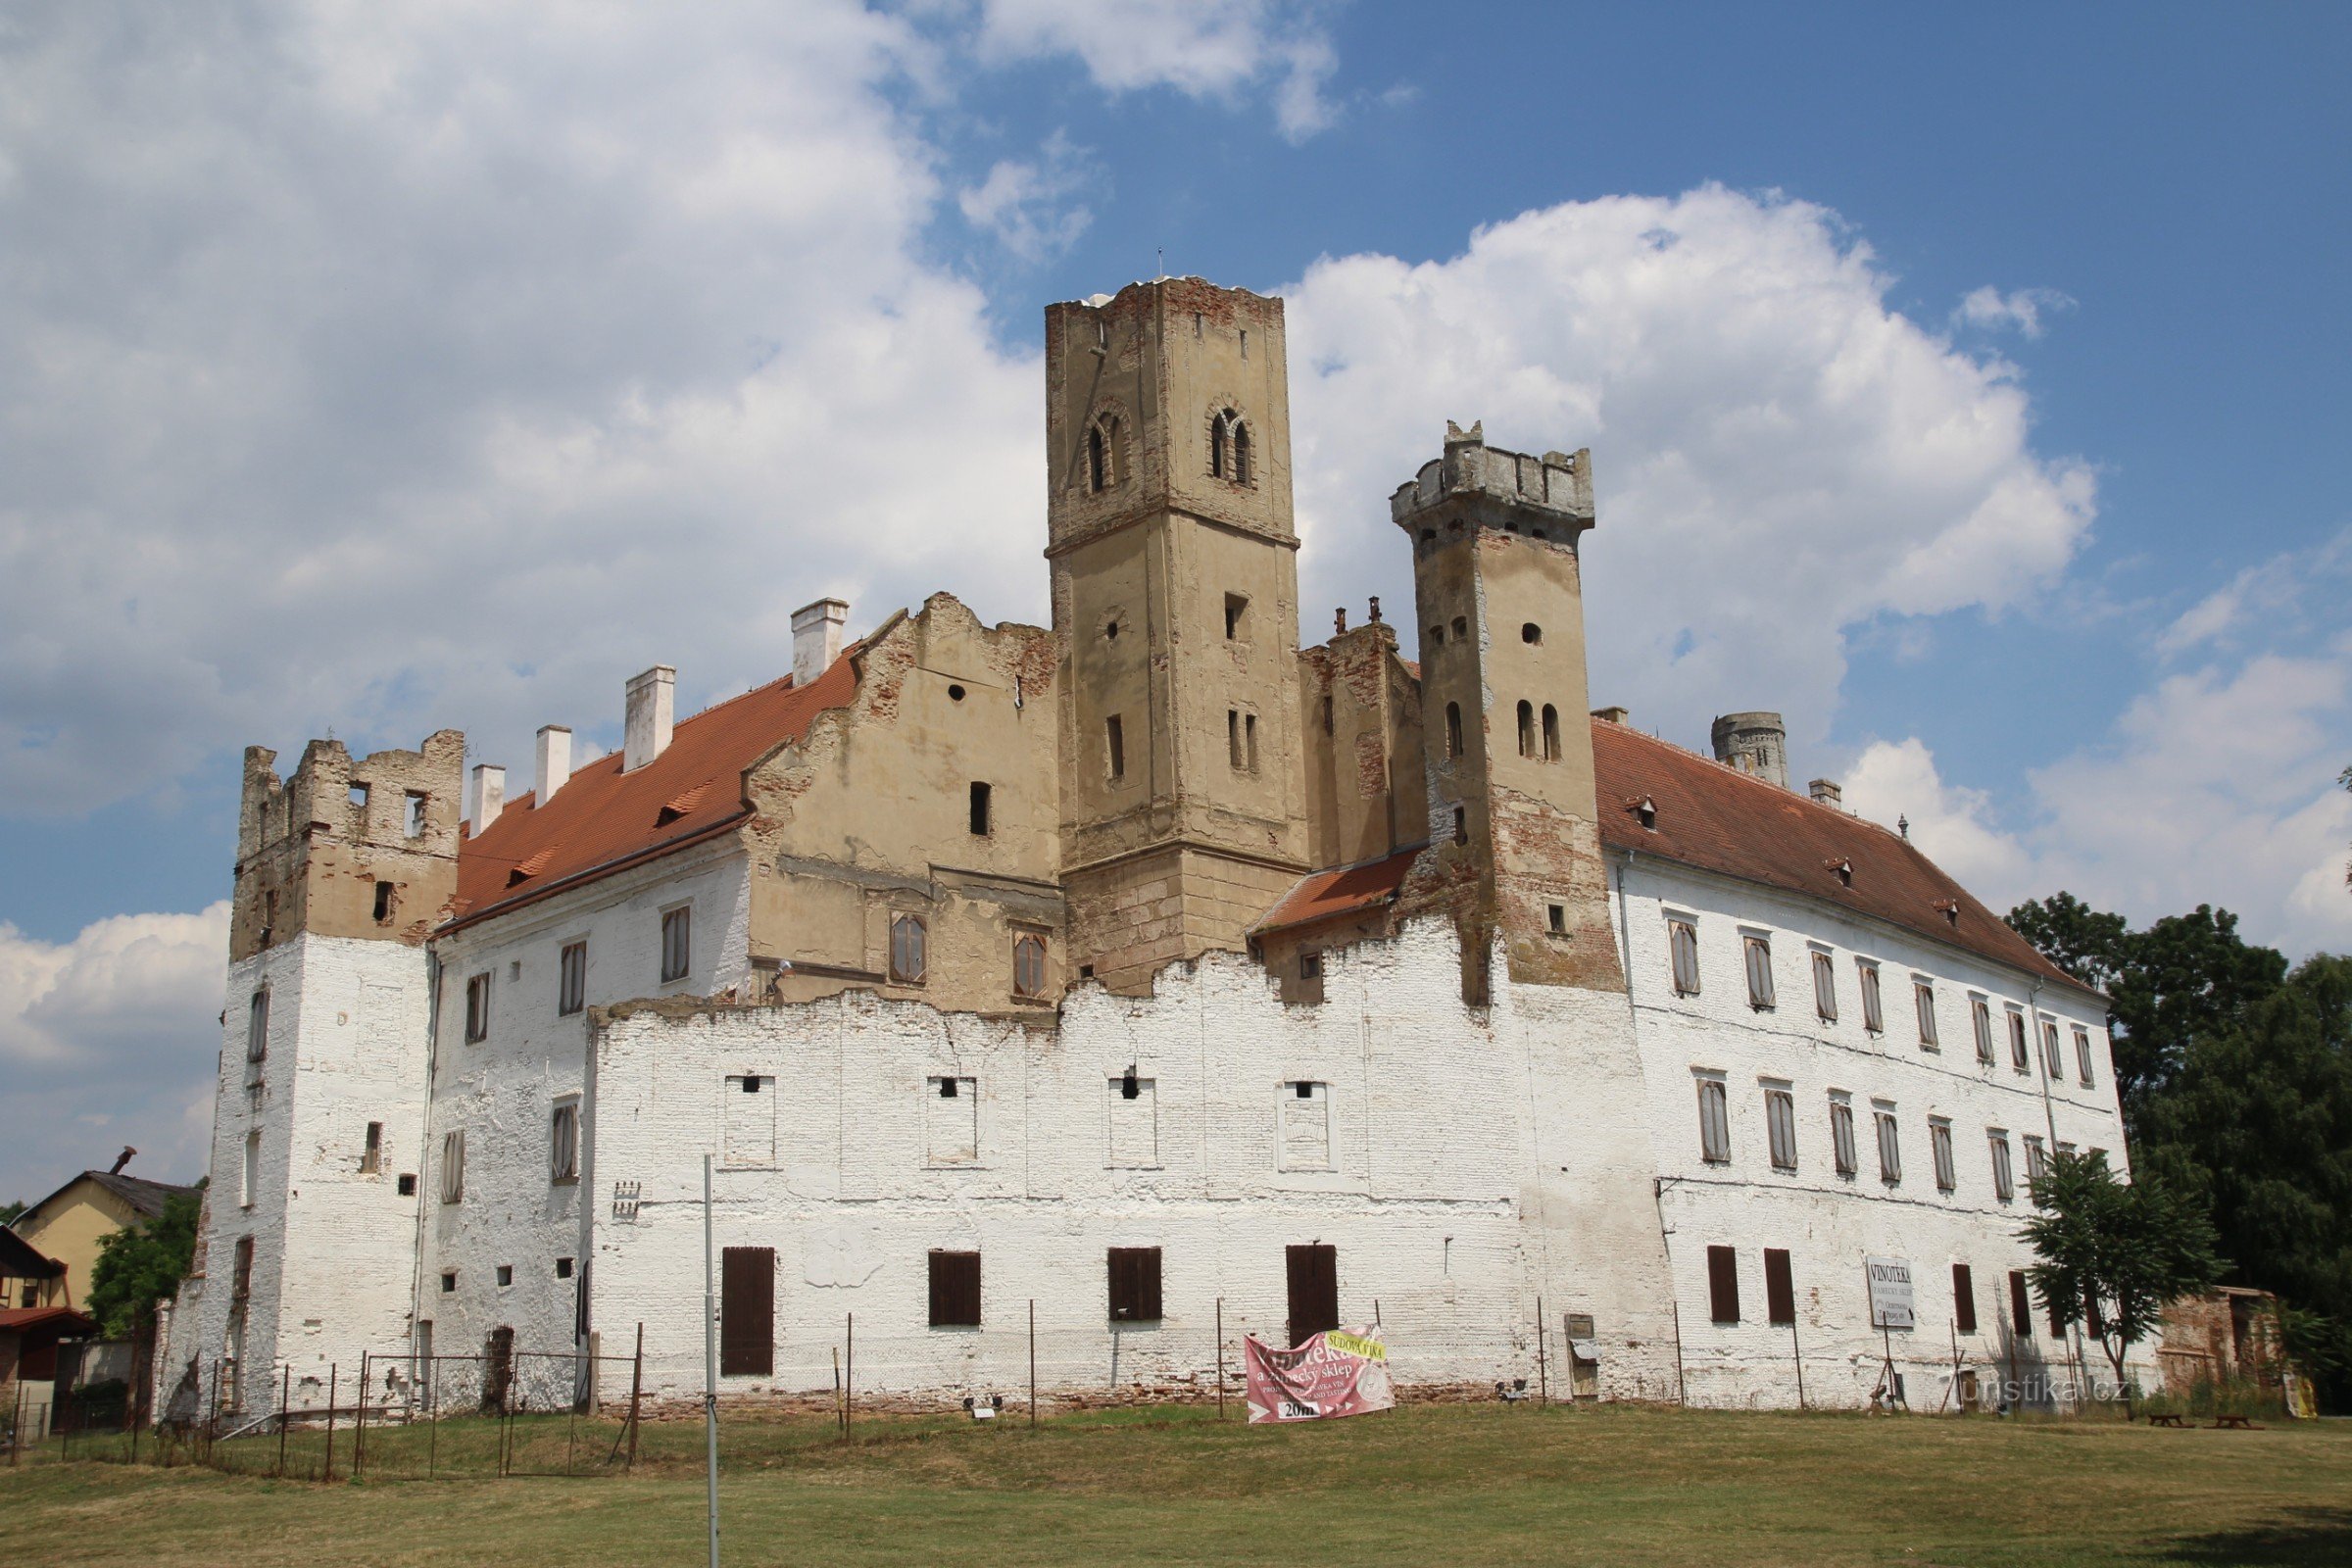 View of the Břeclav castle from the park with a dominant observation tower